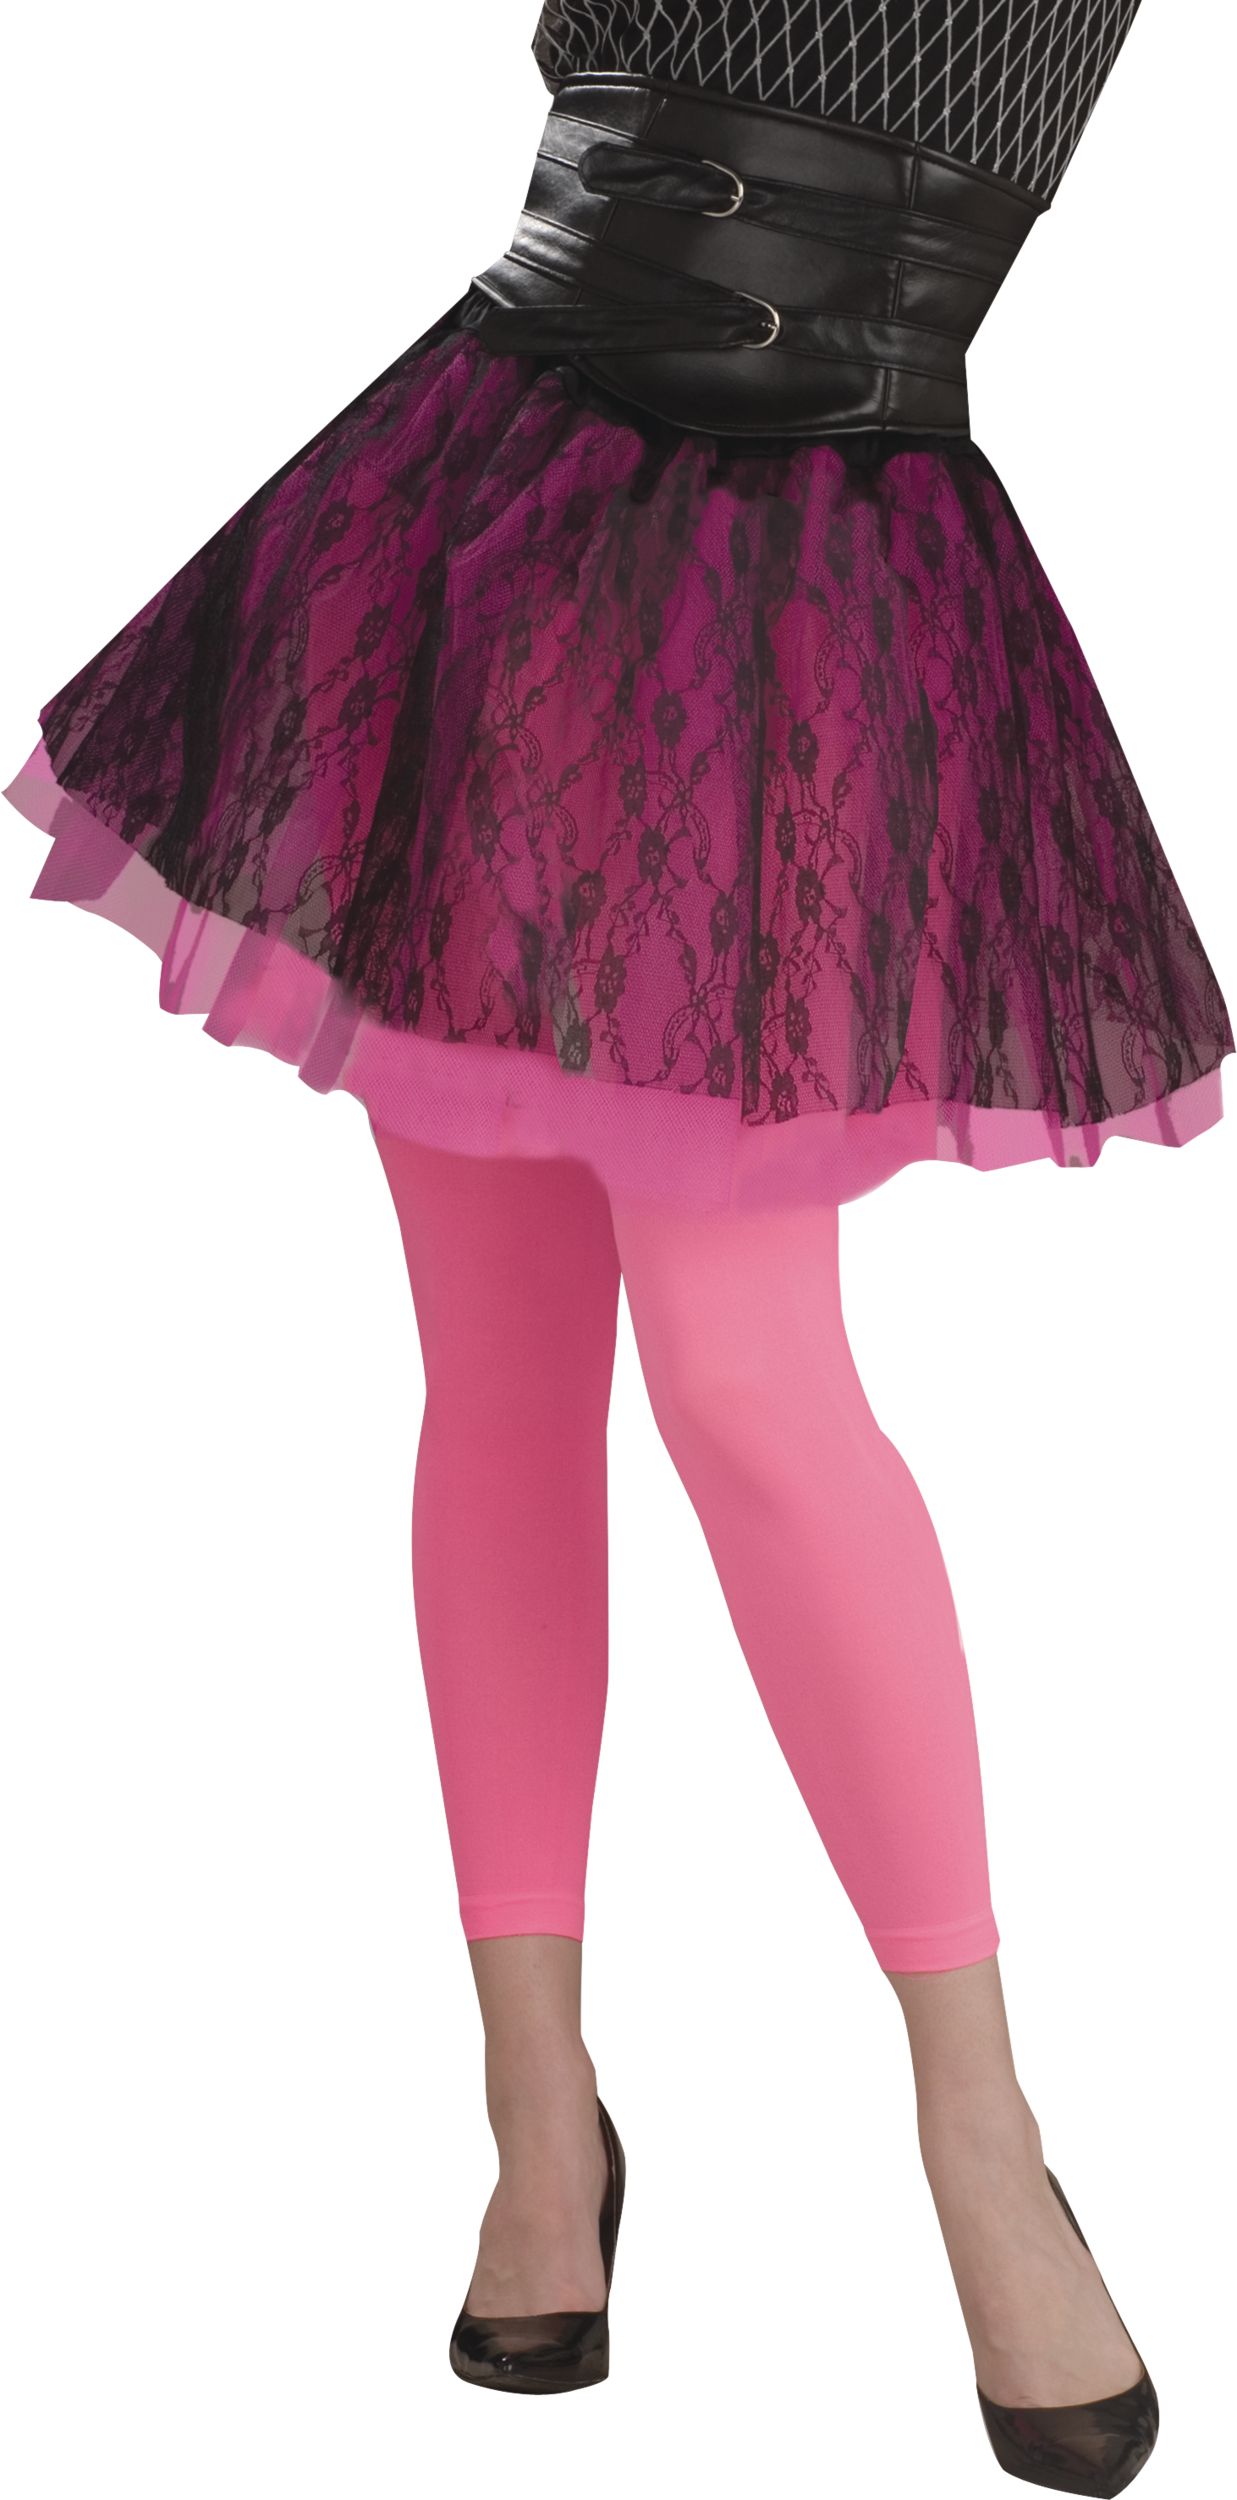 Adult 1980s Neon Footless Tights, Pink, One Size, Wearable Costume  Accessory for Halloween